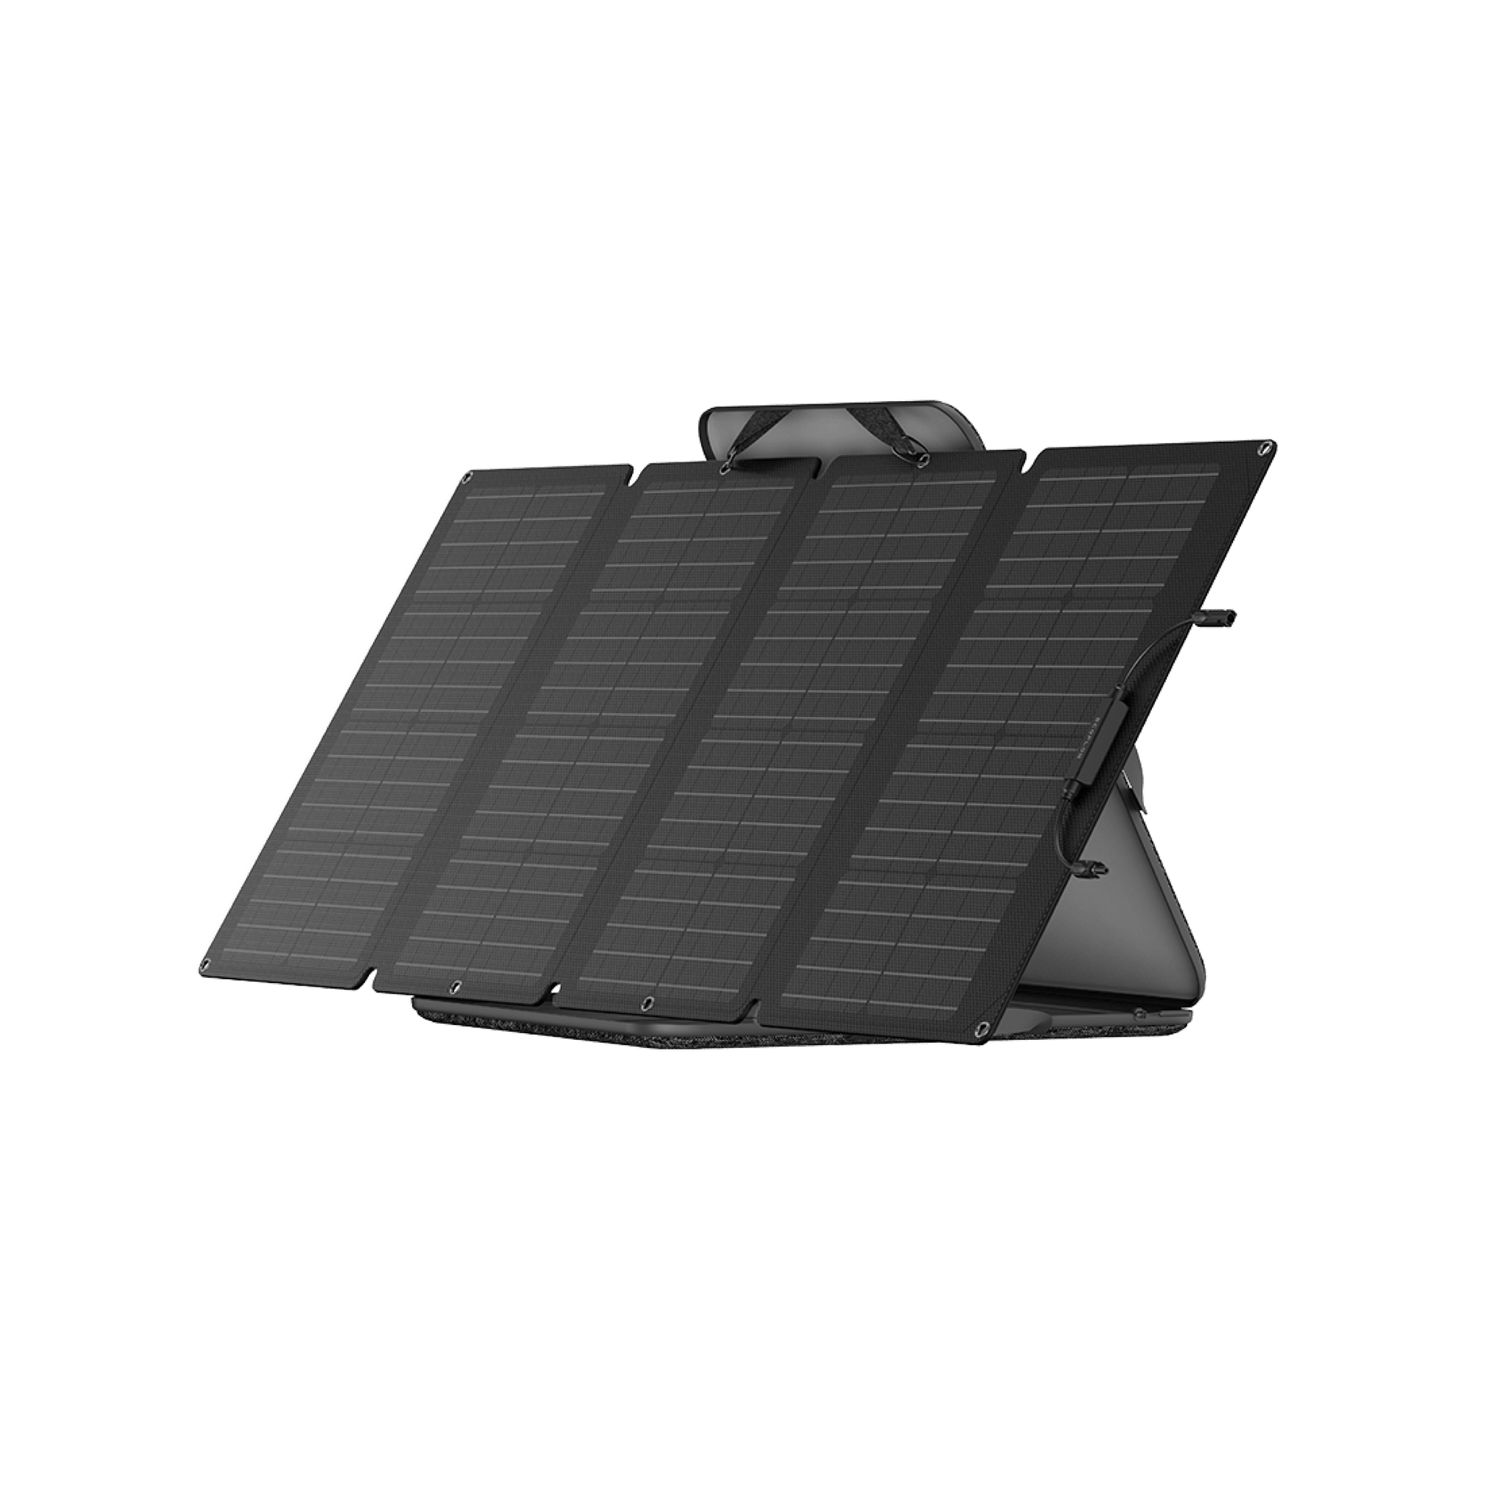 EcoFlow DELTA 2 Solar Generator with Expandable Battery Kit - EF-DELTA2-160W-ZMR330EB - Avanquil